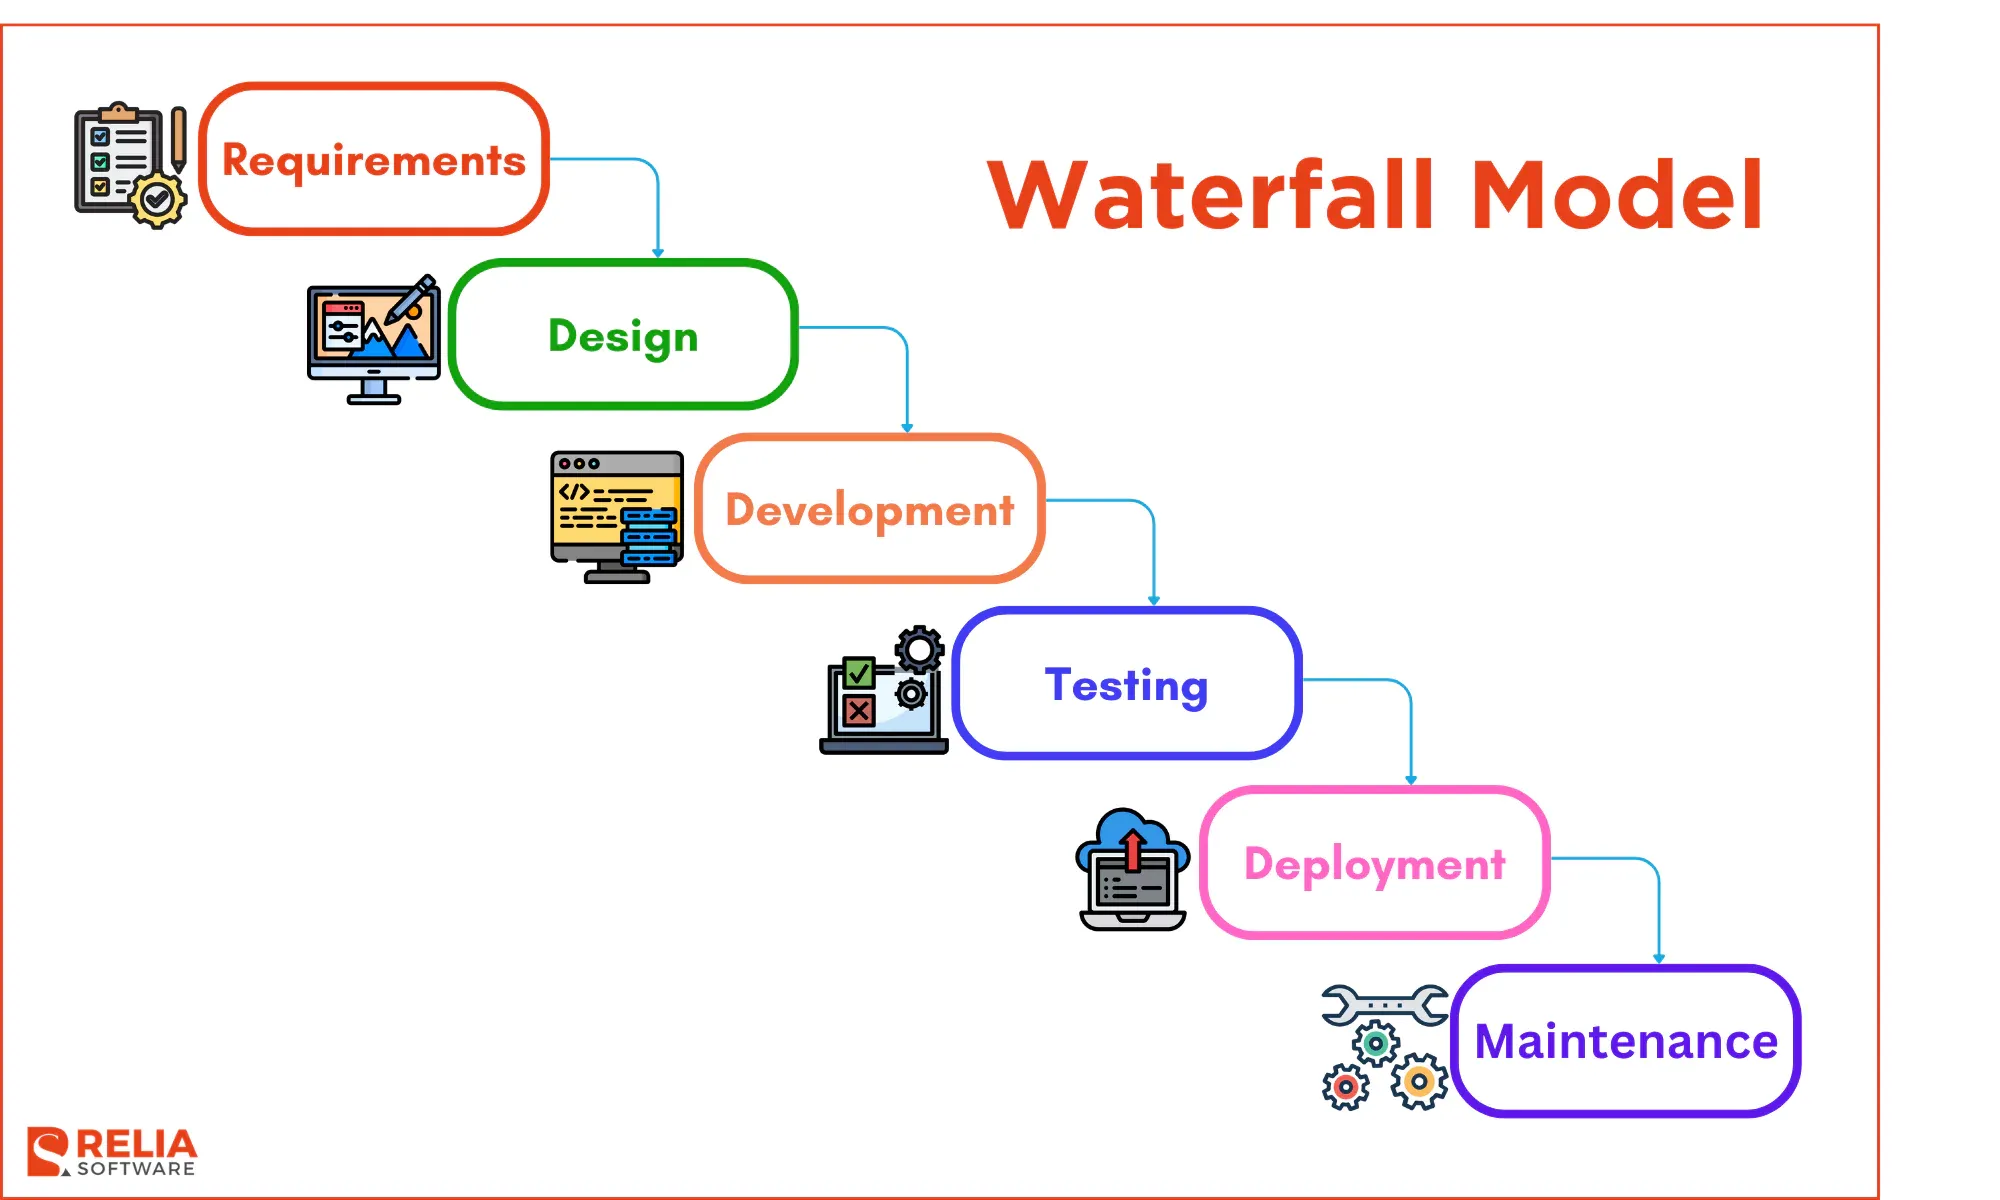 The Waterfall Model is the most traditional Software Development Life Cycle (SDLC) methodology.